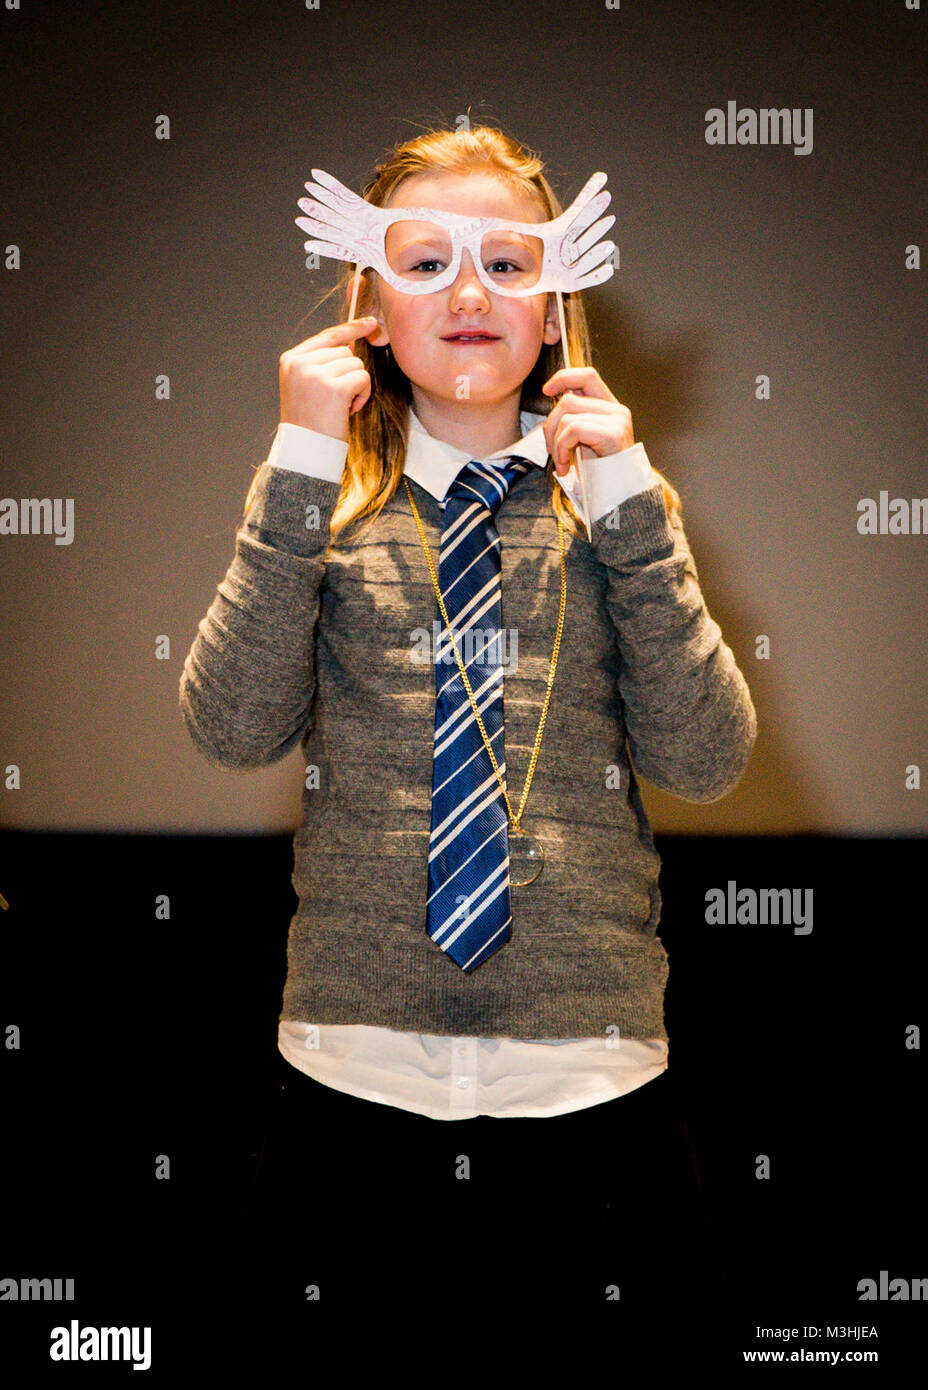 SHAPE, Belgium (Feb. 06, 2018) A Luna Lovegood cosplayer poses during a costume contest at the inaugural Eight Nights of Harry Potter event at the SHAPE Cinema Alliance Auditorium. The United States Army Garrison Benelux Army Community Service partnered with American Forces Network Benelux and SHAPE Morale and Welfare Branch to organize a multi-week Harry Potter themed marathon to boost morale, present family resources to the audience, and use a popular story to bring the SHAPE NATO community together. (U.S. Air Force Stock Photo